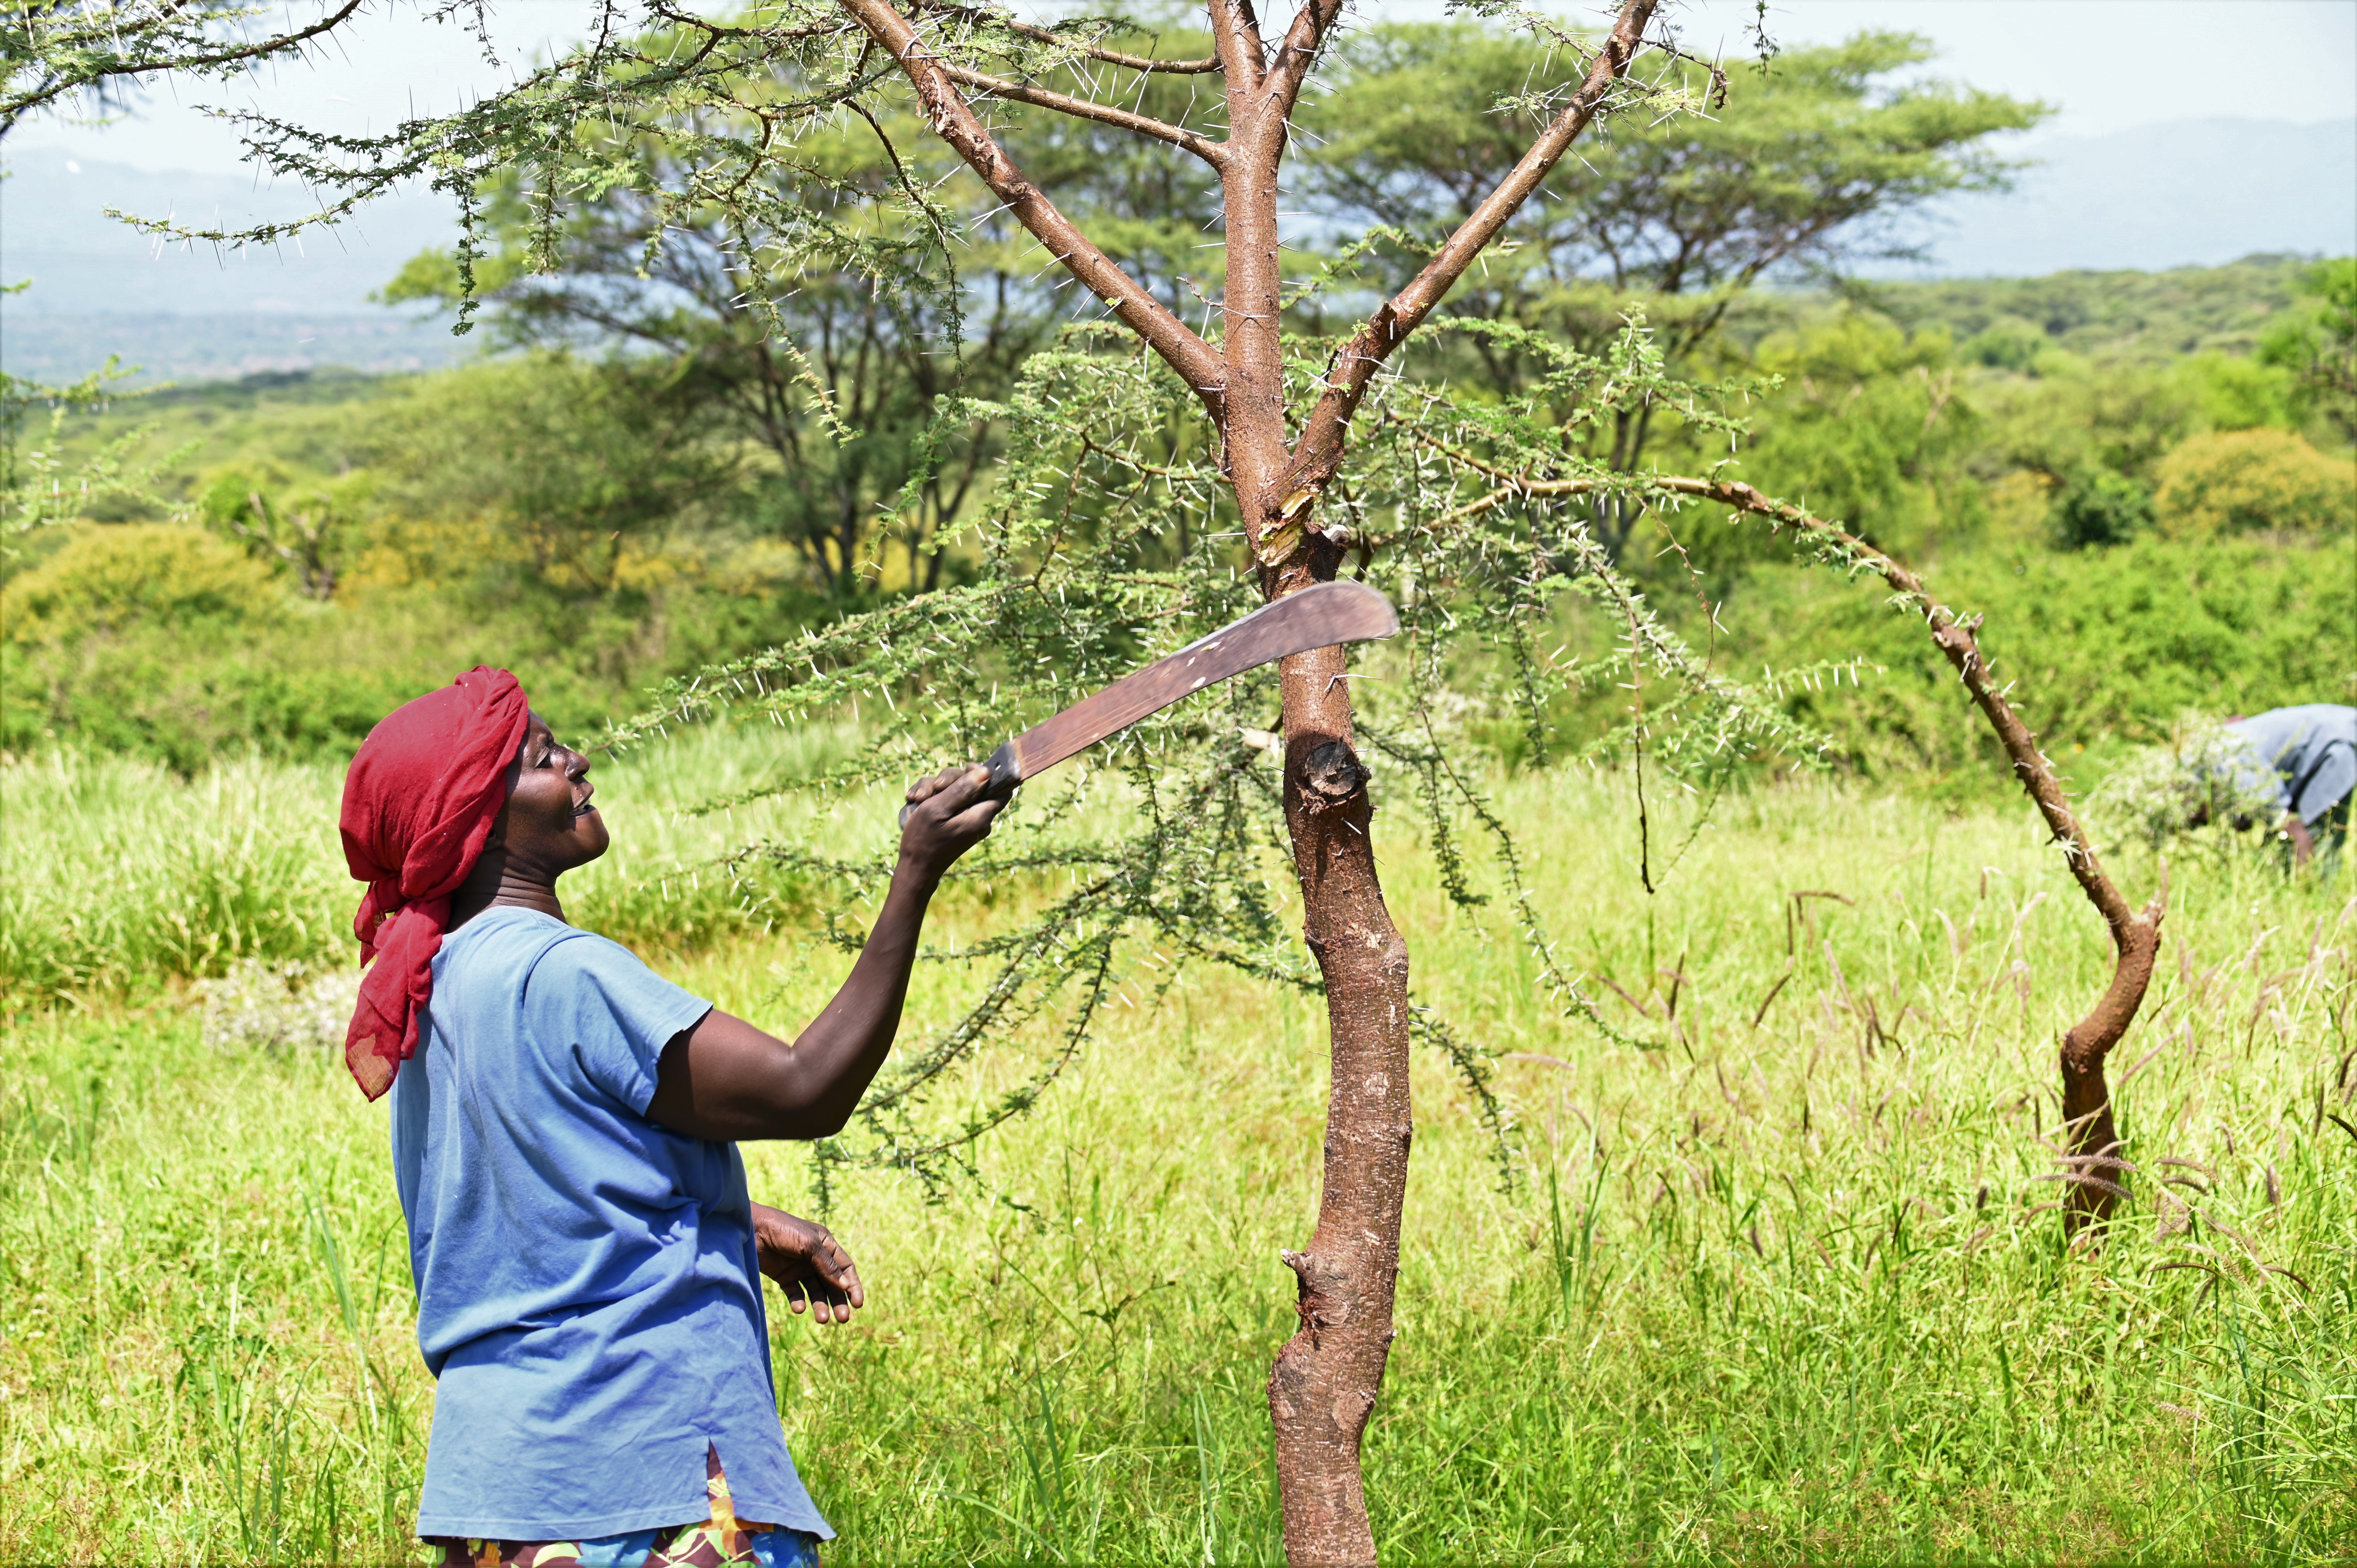 Joyce pruning a tree. She uses the pruned branches as firewood. At times she uses the thorny ones to protect the pruned trees preventing destruction by livestock. ©World Vision Photo/ Hellen Owuor